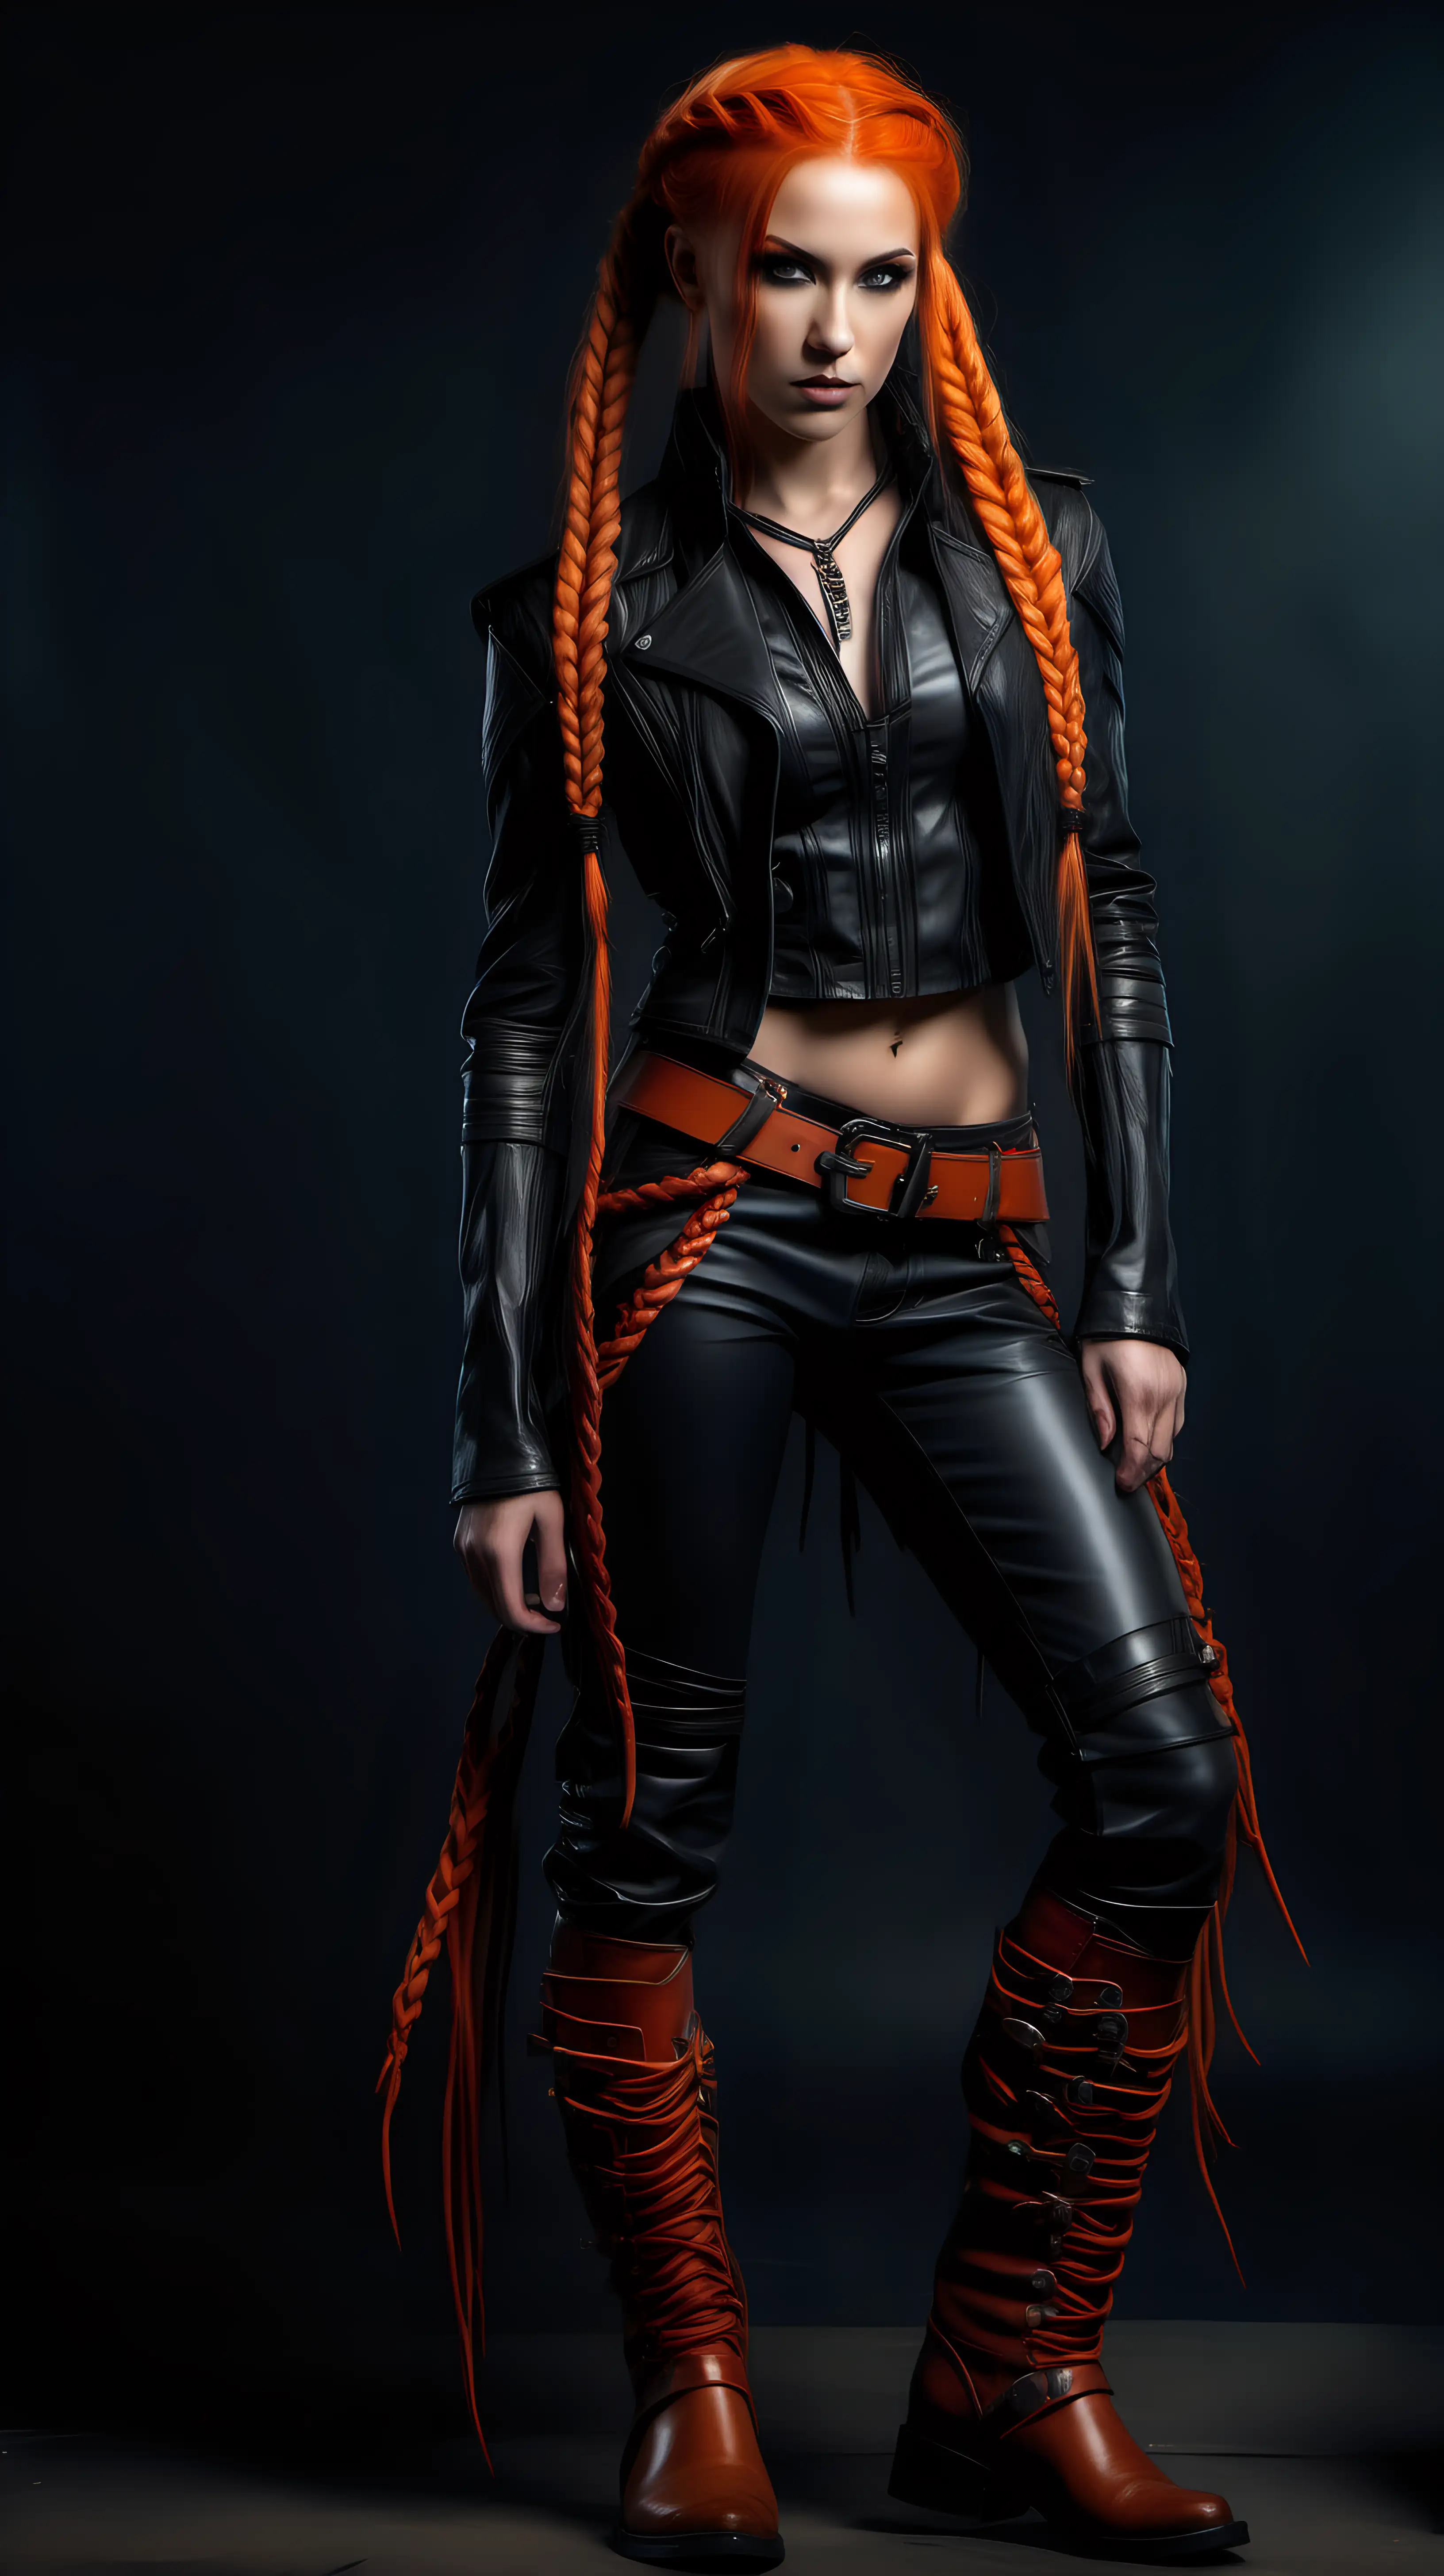 Muscular petite rogue with leather clothes and long orange hair, tight braids, leather boots, fantasy style, full length portrait 